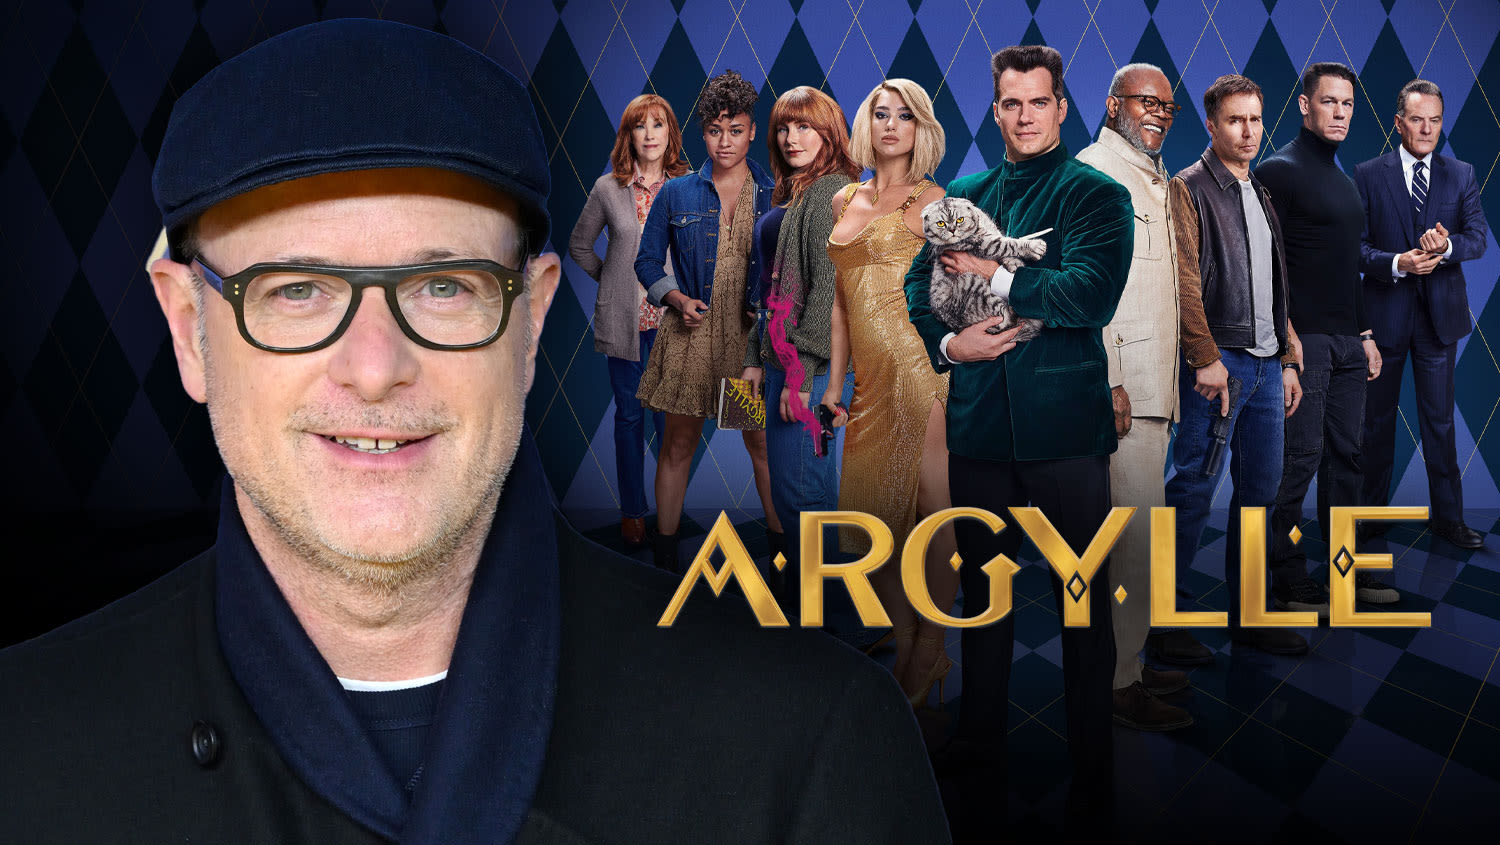 Matthew Vaughn On “Vitriolic” Criticism Of ‘Argylle’: “What Have I Done To Offend These People?”